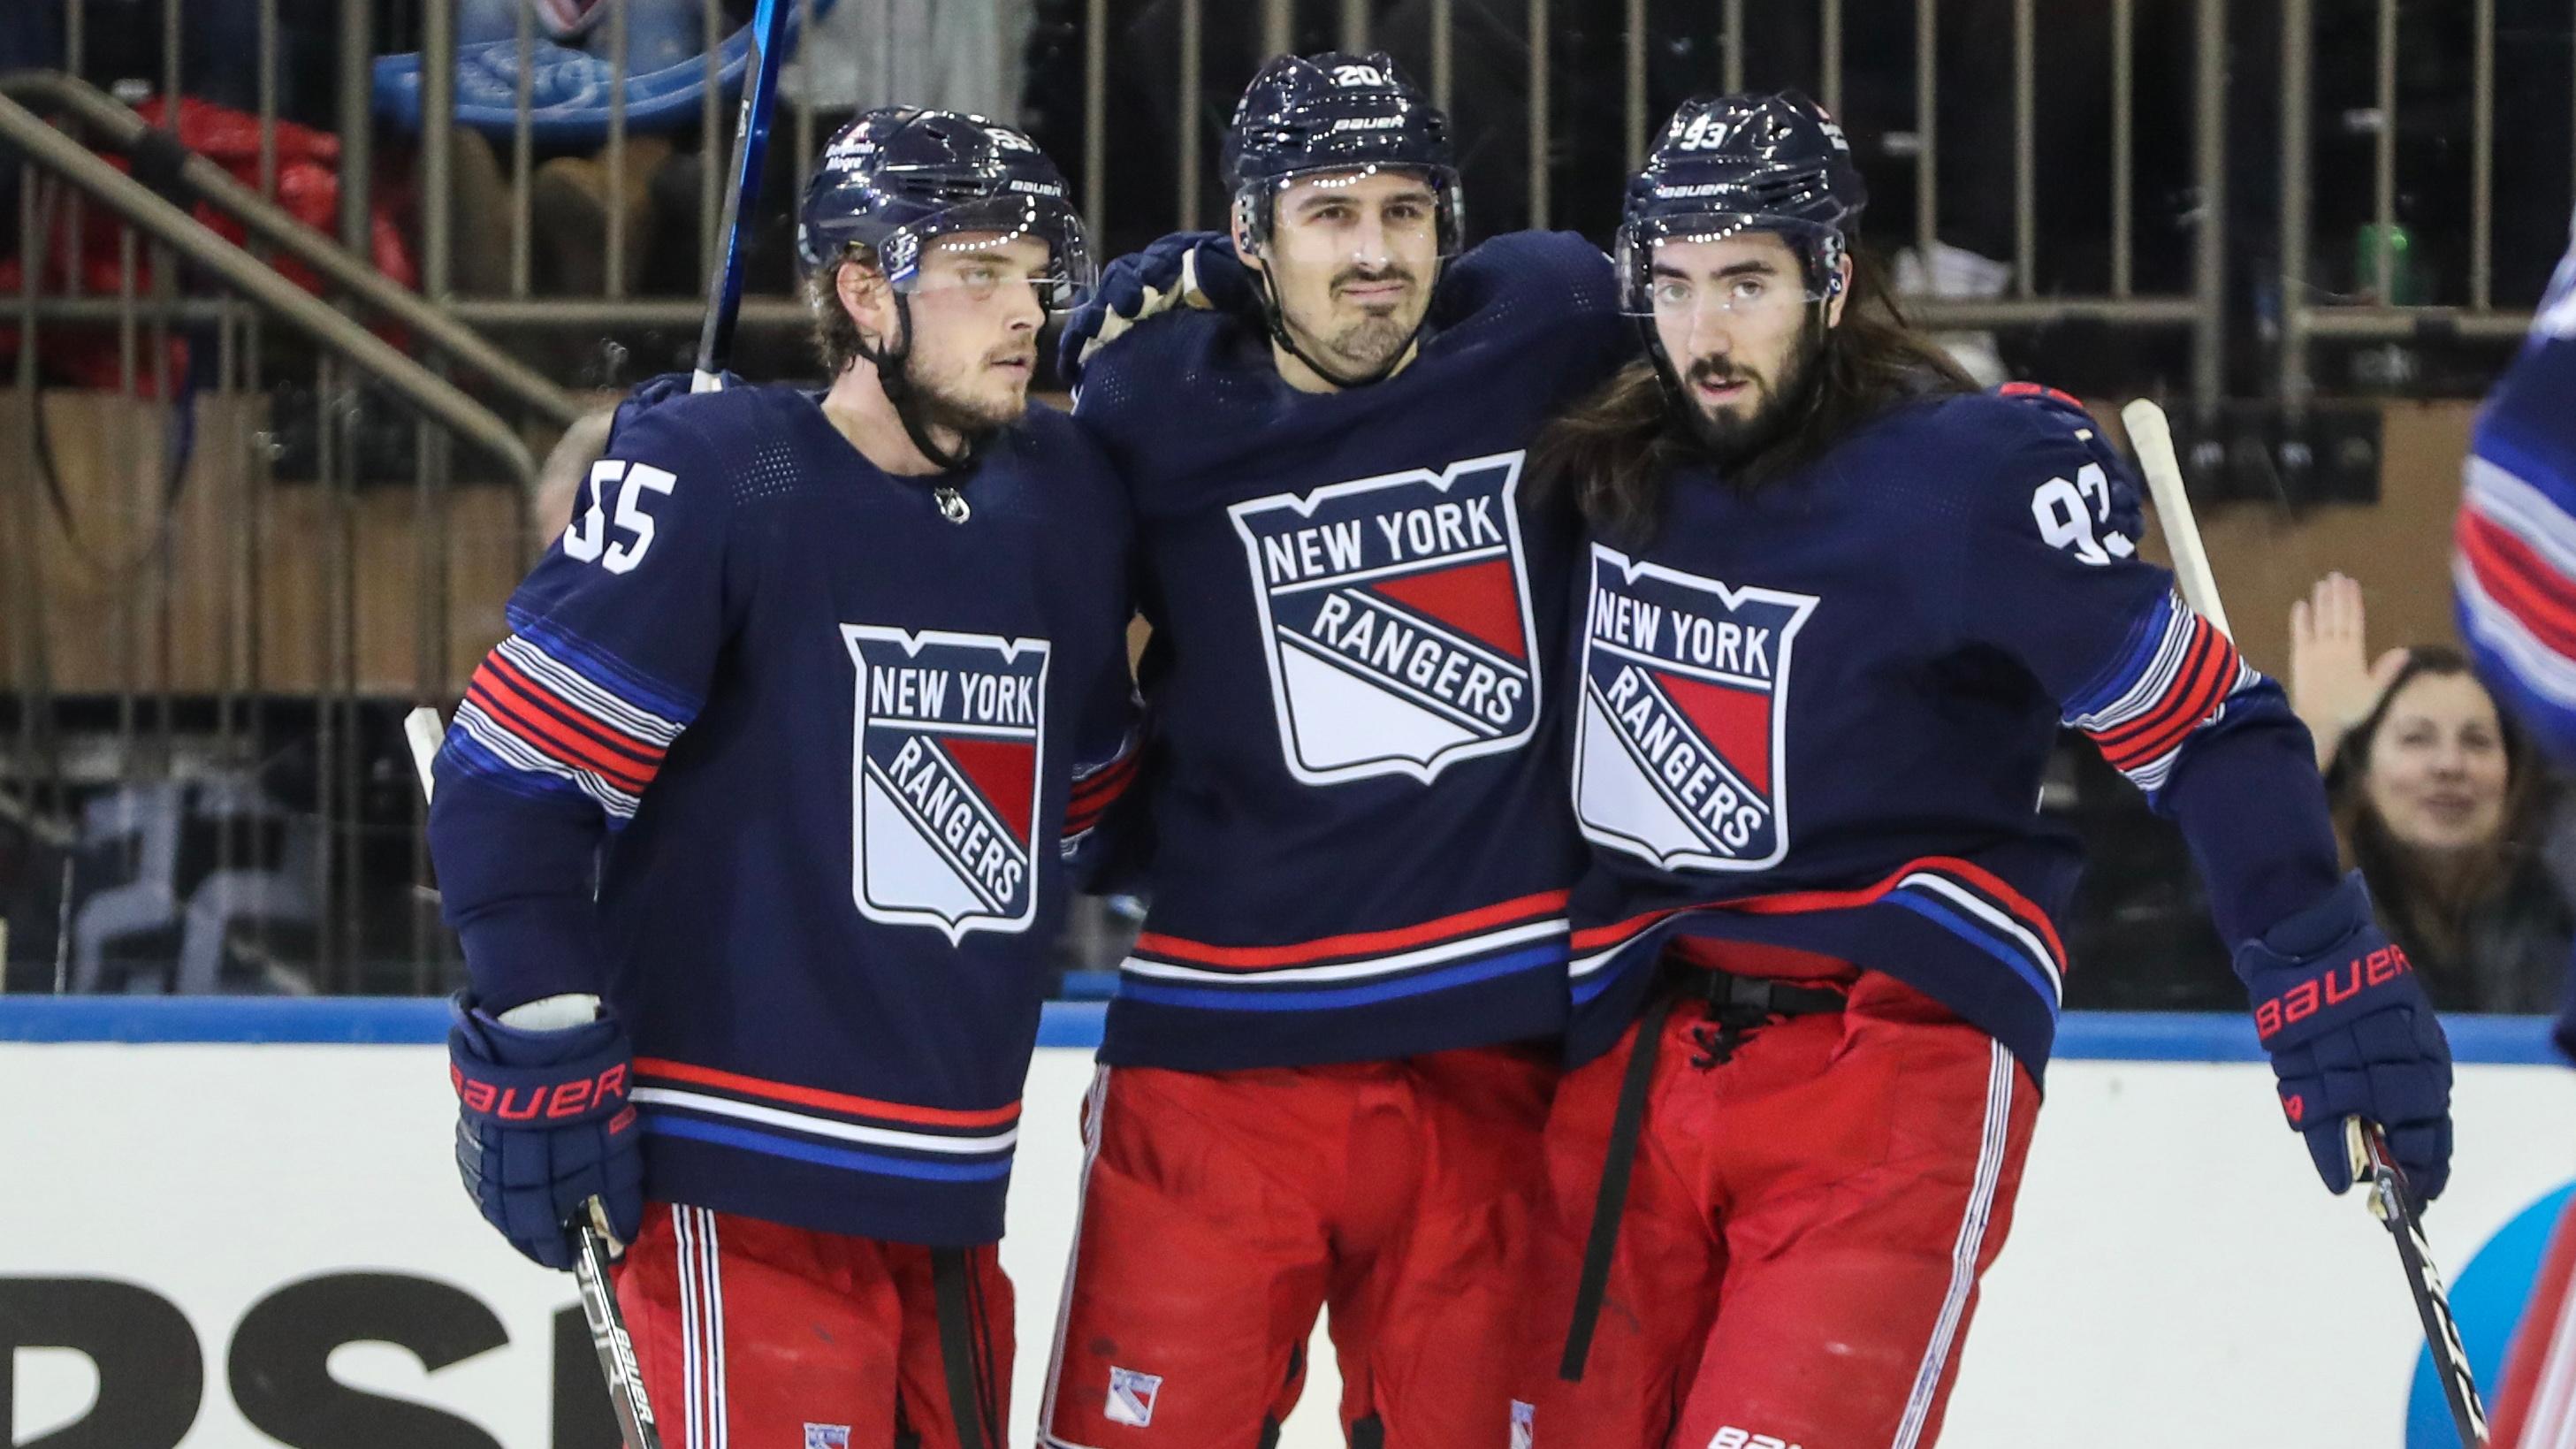 New York Rangers left wing Chris Kreider (20) is greeted by defenseman Ryan Lindgren (55) and center Mika Zibanejad (93) after scoring a goal in the first period against the Anaheim Ducks at Madison Square Garden. / Wendell Cruz-USA TODAY Sports